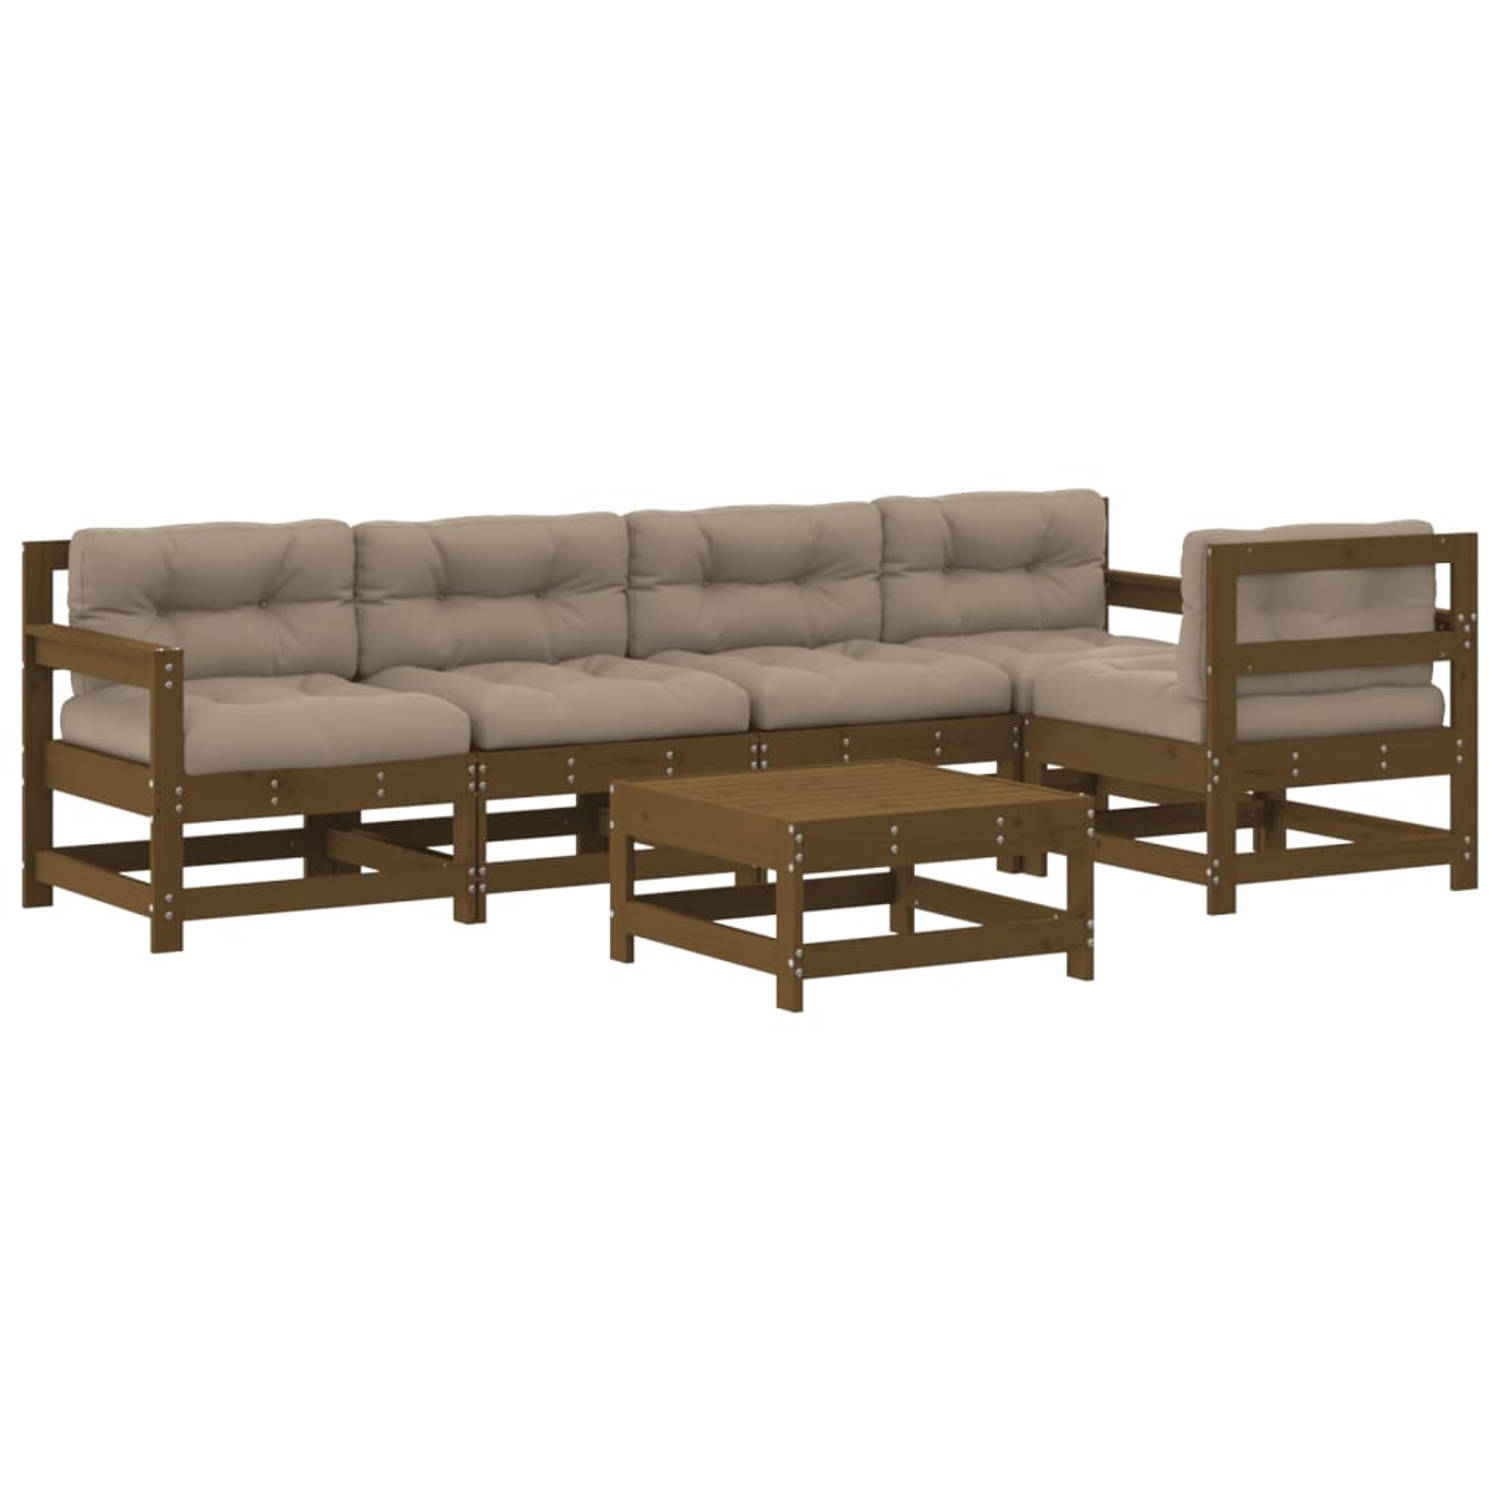 The Living Store Loungeset Tuin - Hout - Grenenhout - Modulair - Honingbruin - 62x62x70.5cm - 110kg